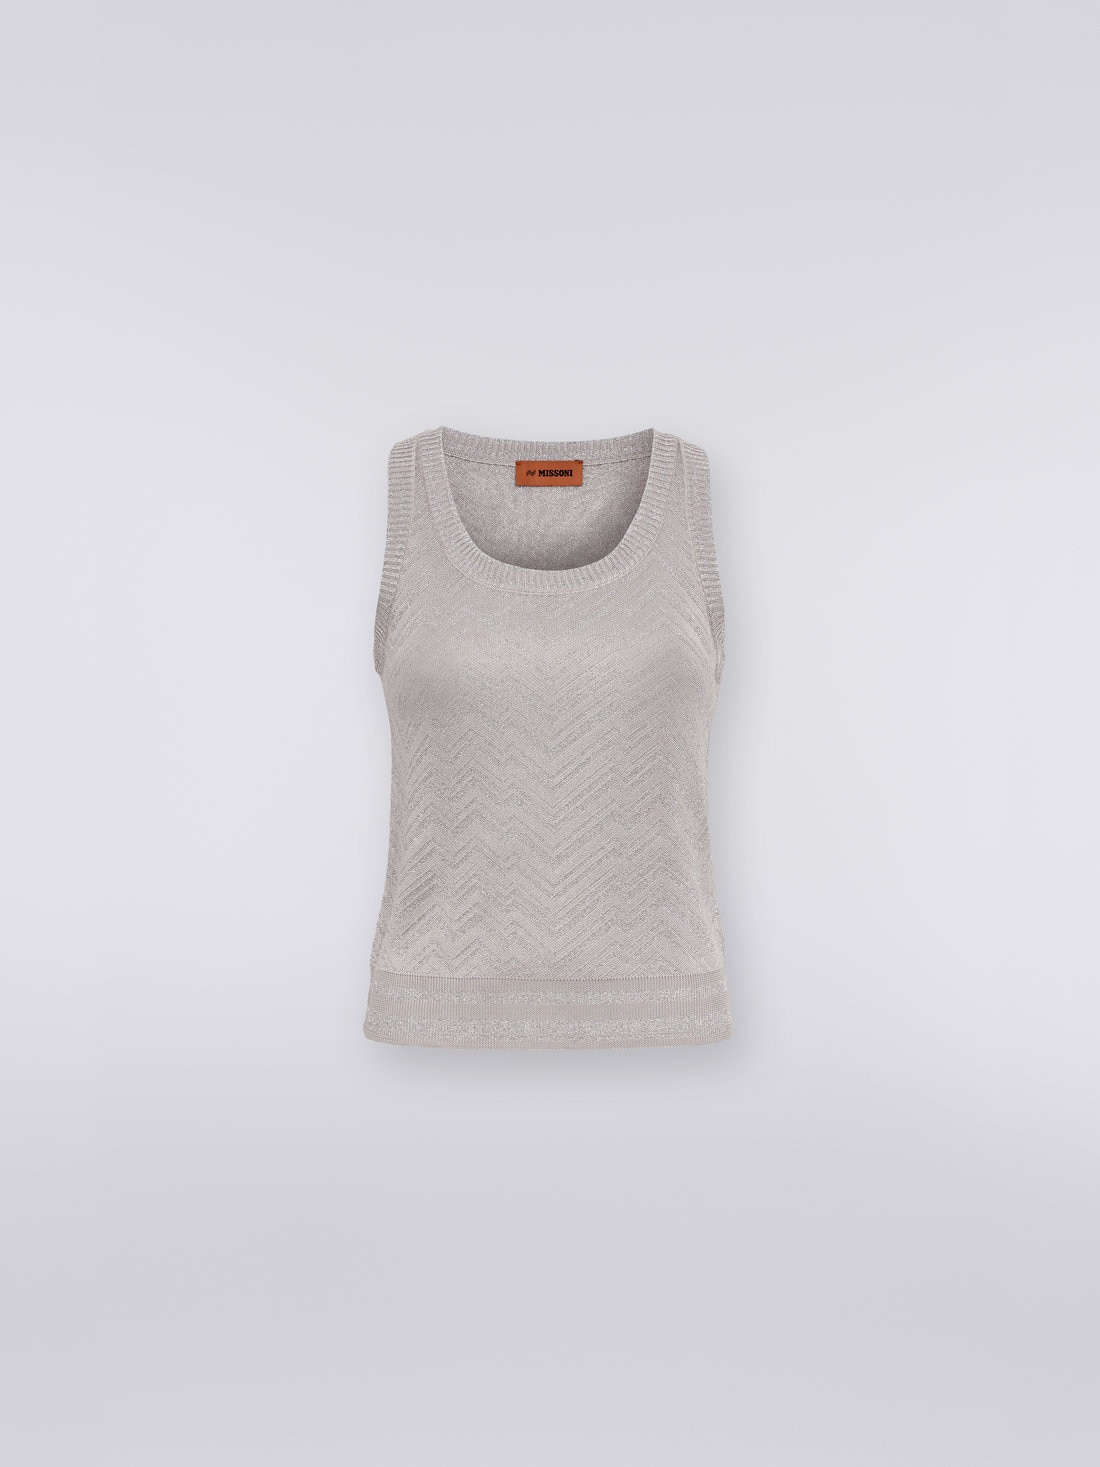 Viscose blend tank top with tone-on-tone chevron and lamé, Silver   - DS23SK27BK021PS91DI - 0